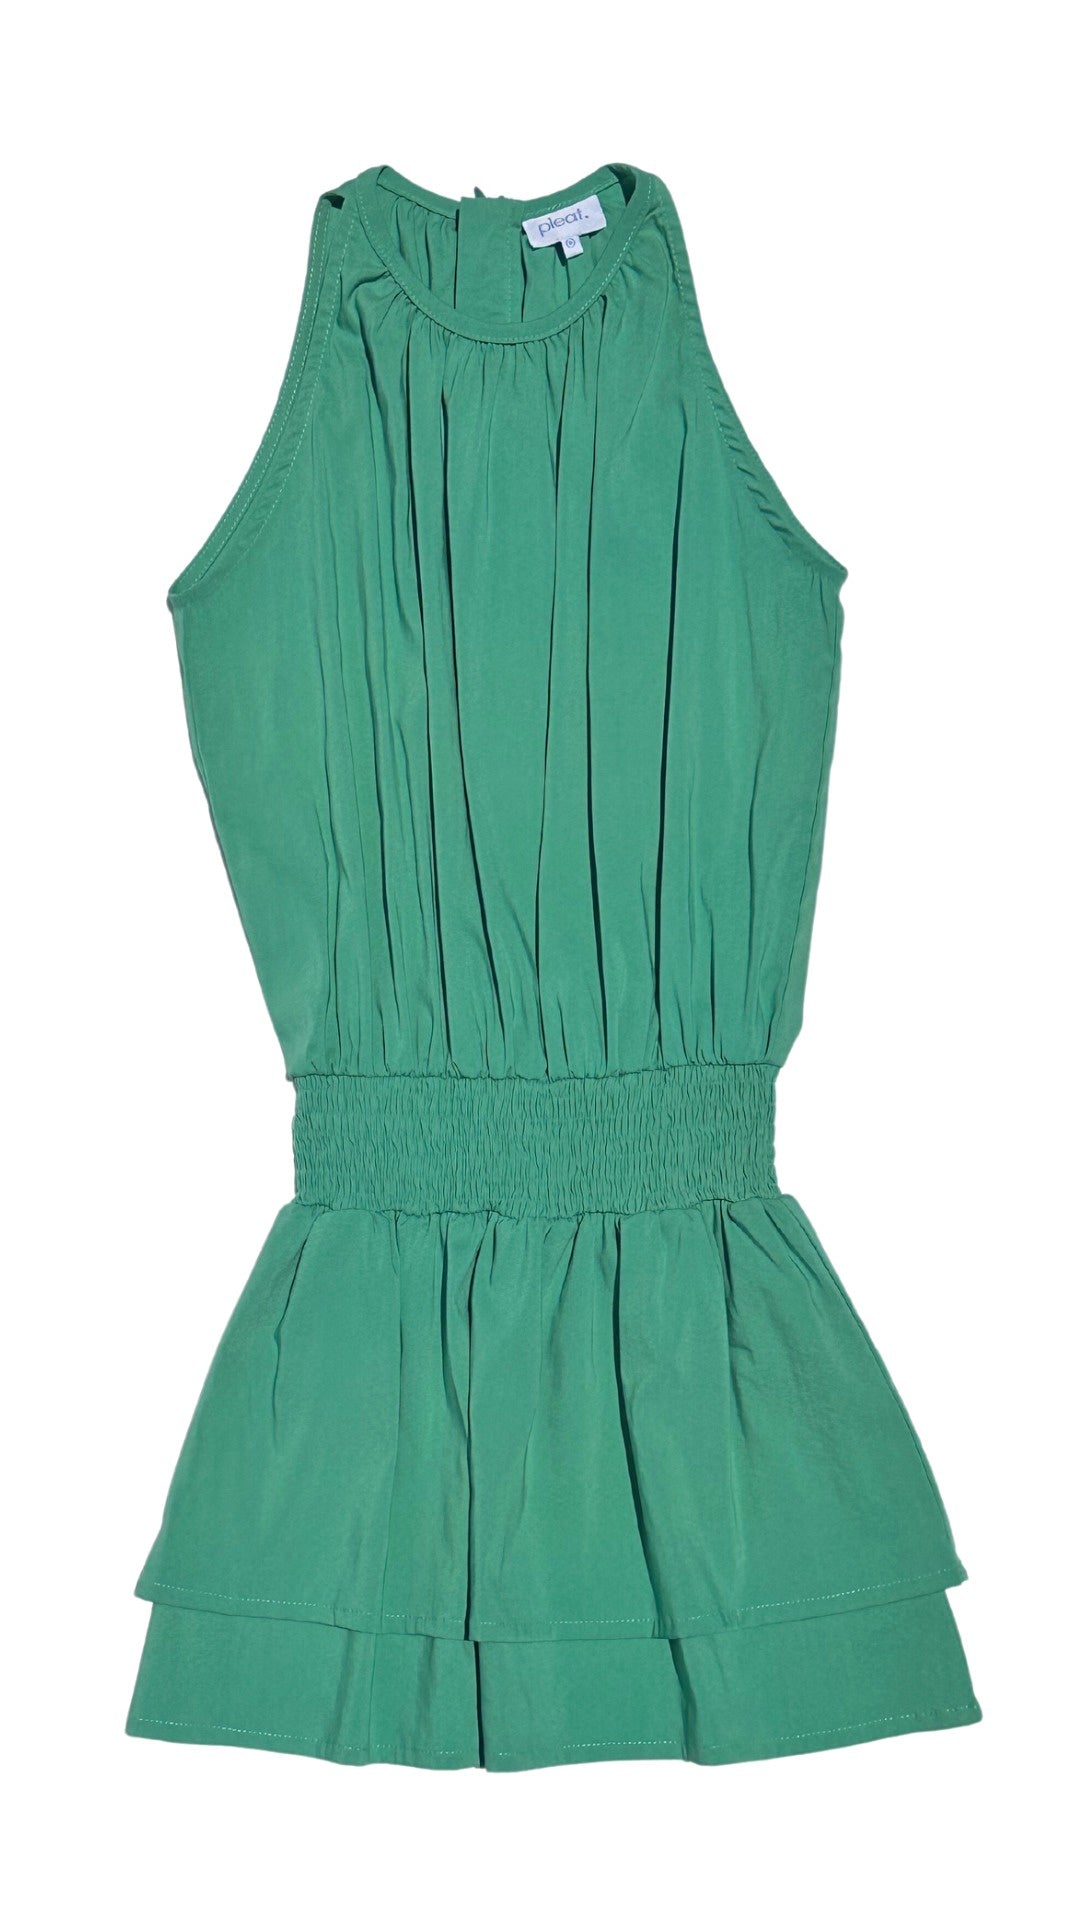 Pleat Collection Emerald Wells Dress 5102